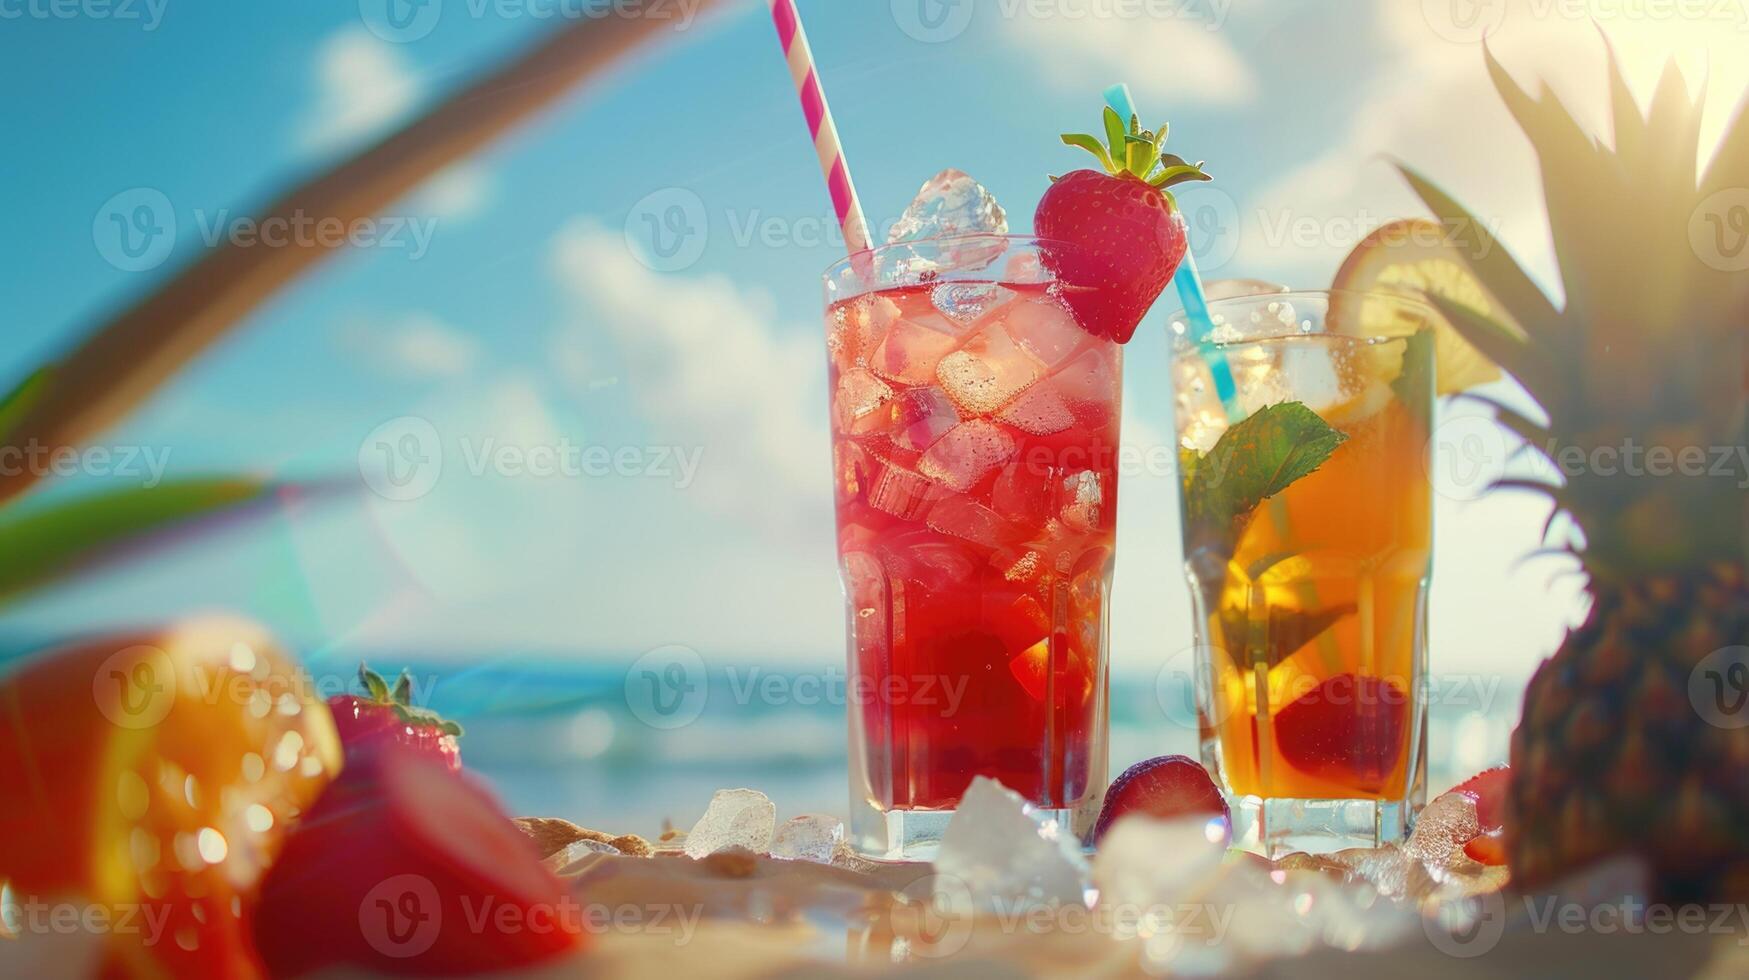 Refreshing summer drinks by the beach. photo